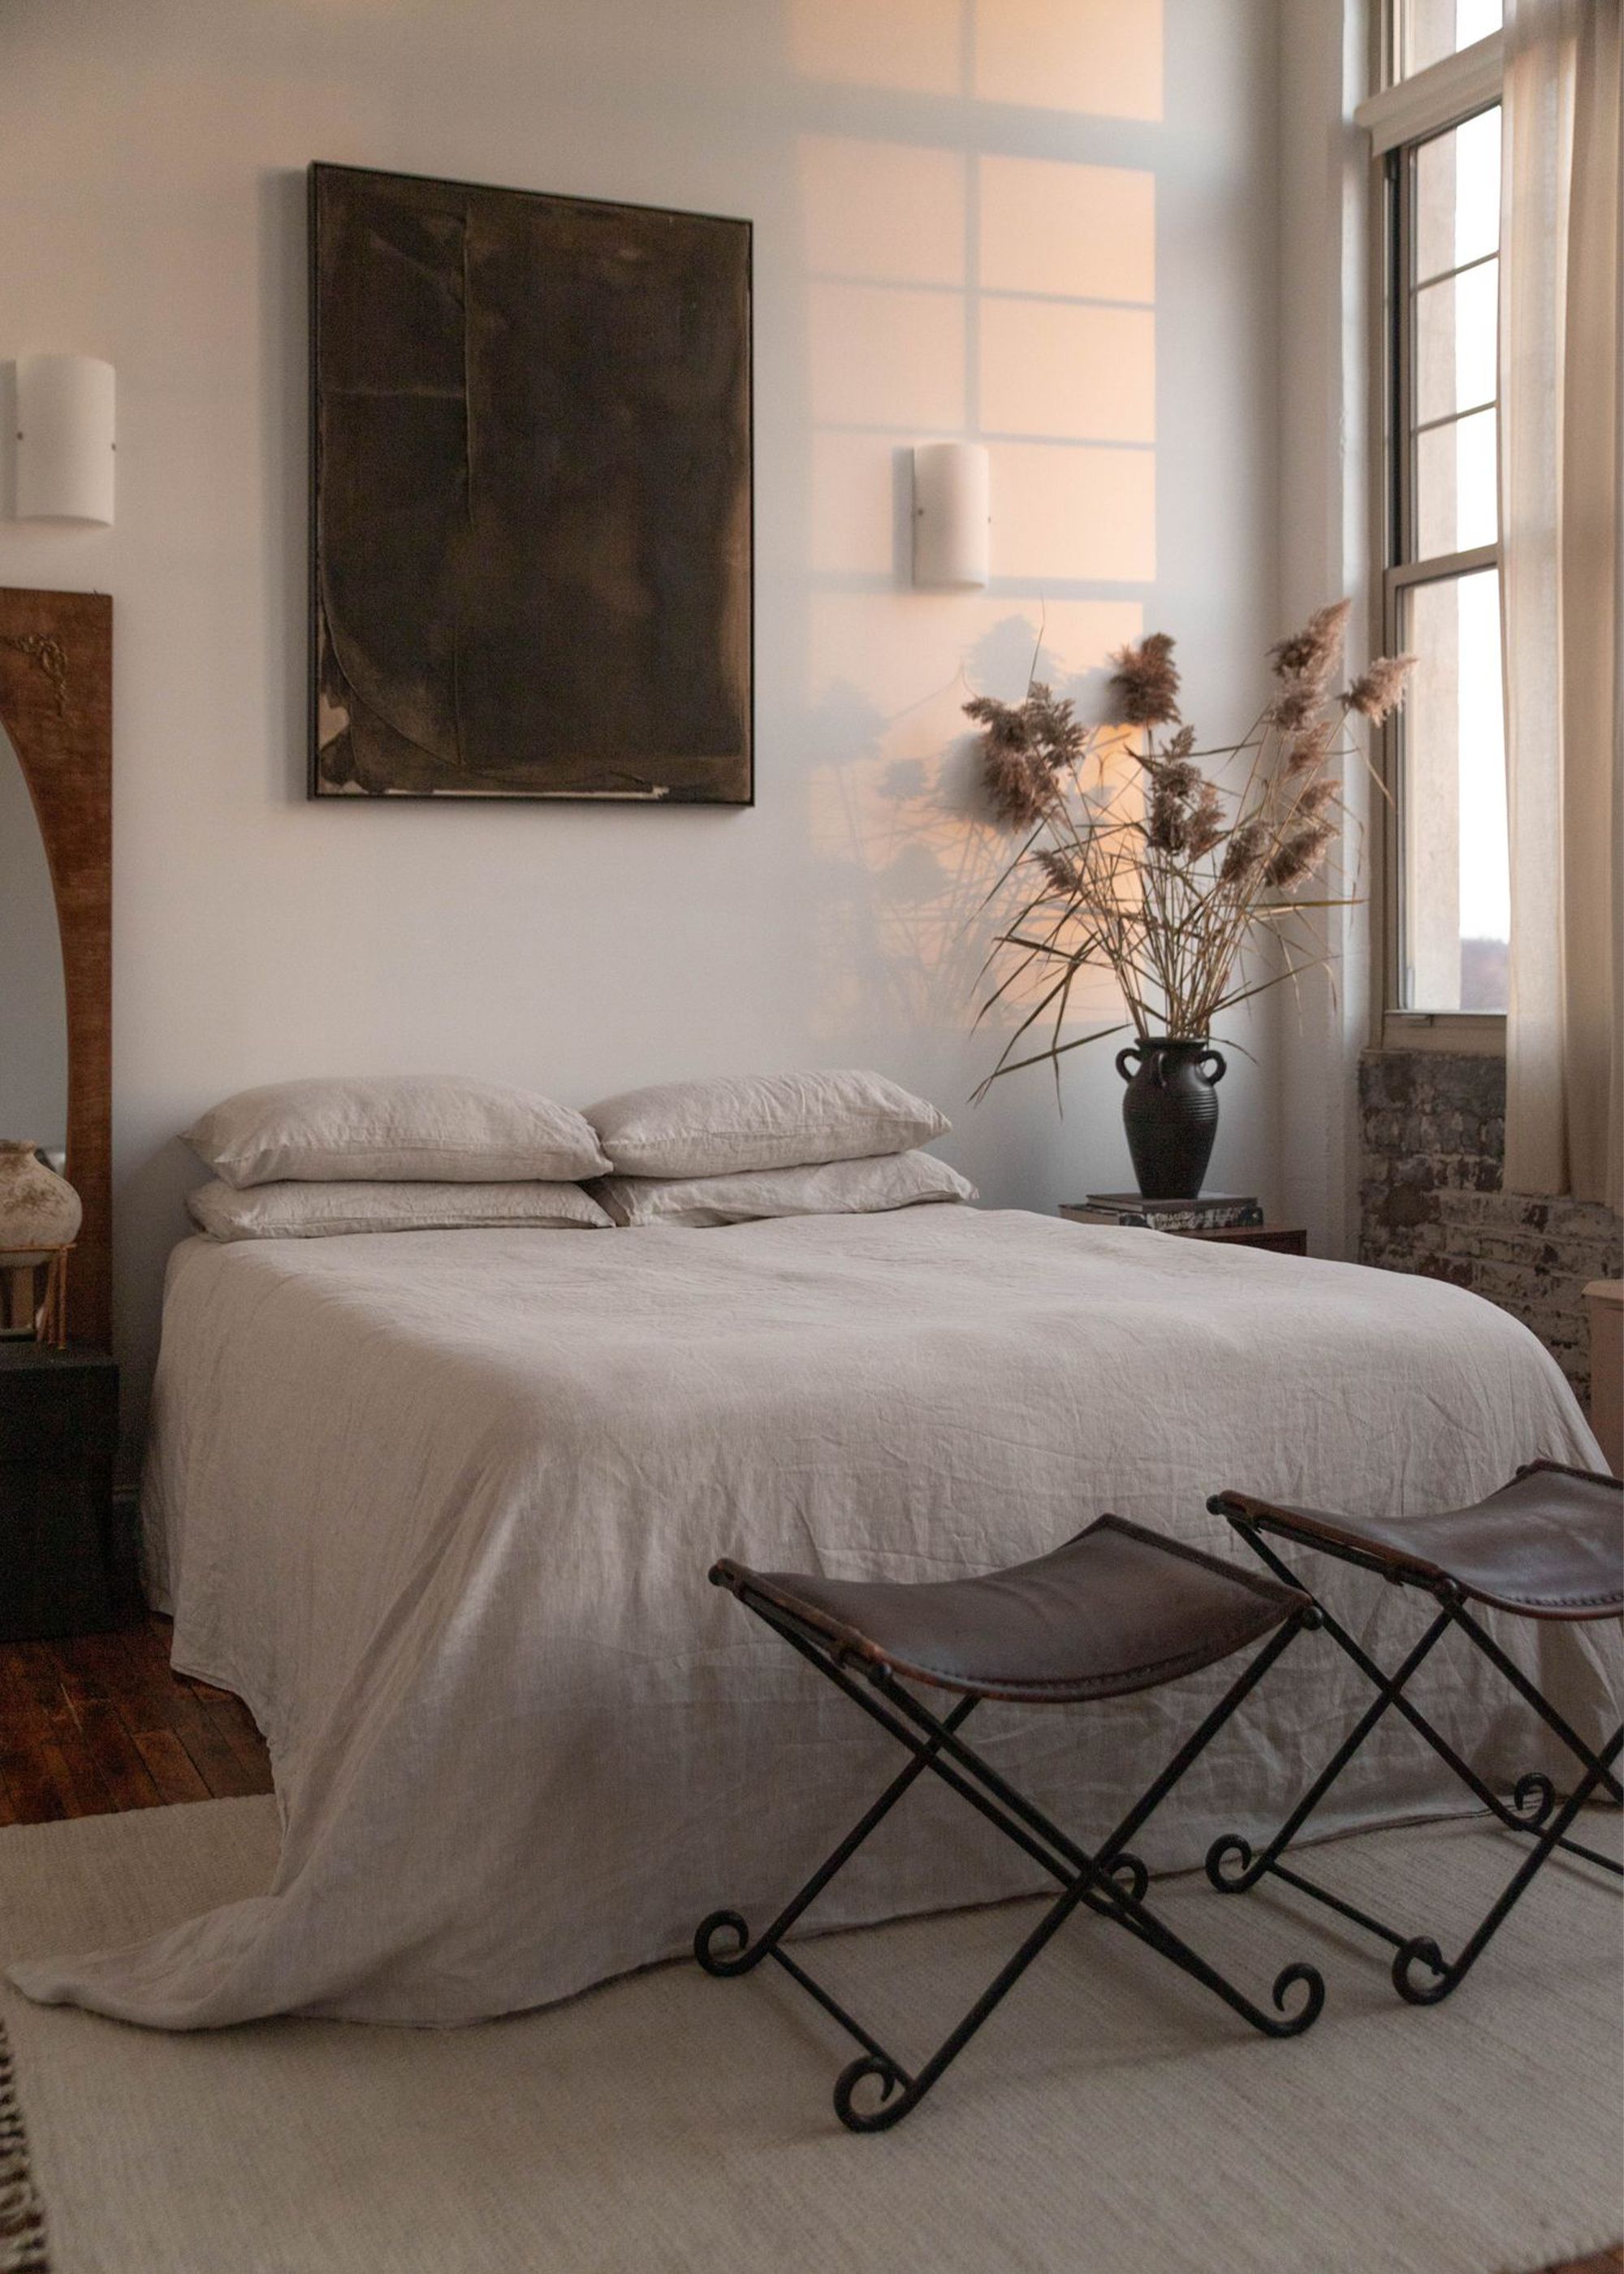 21 White Bedroom Ideas for a Serene Space